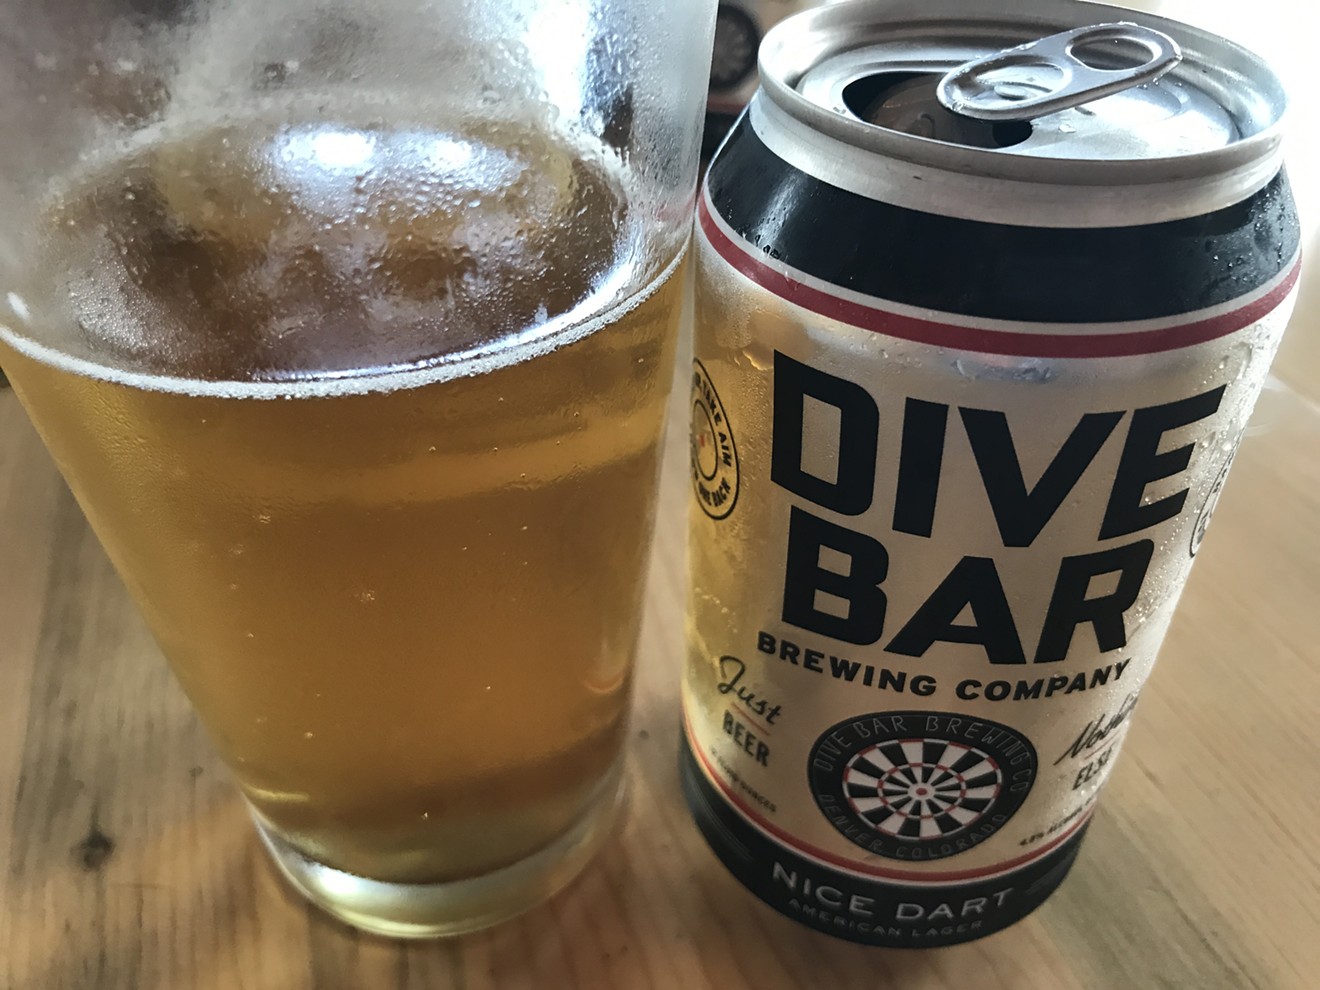 Dive Bar Brewing is coming to a dive bar near you.